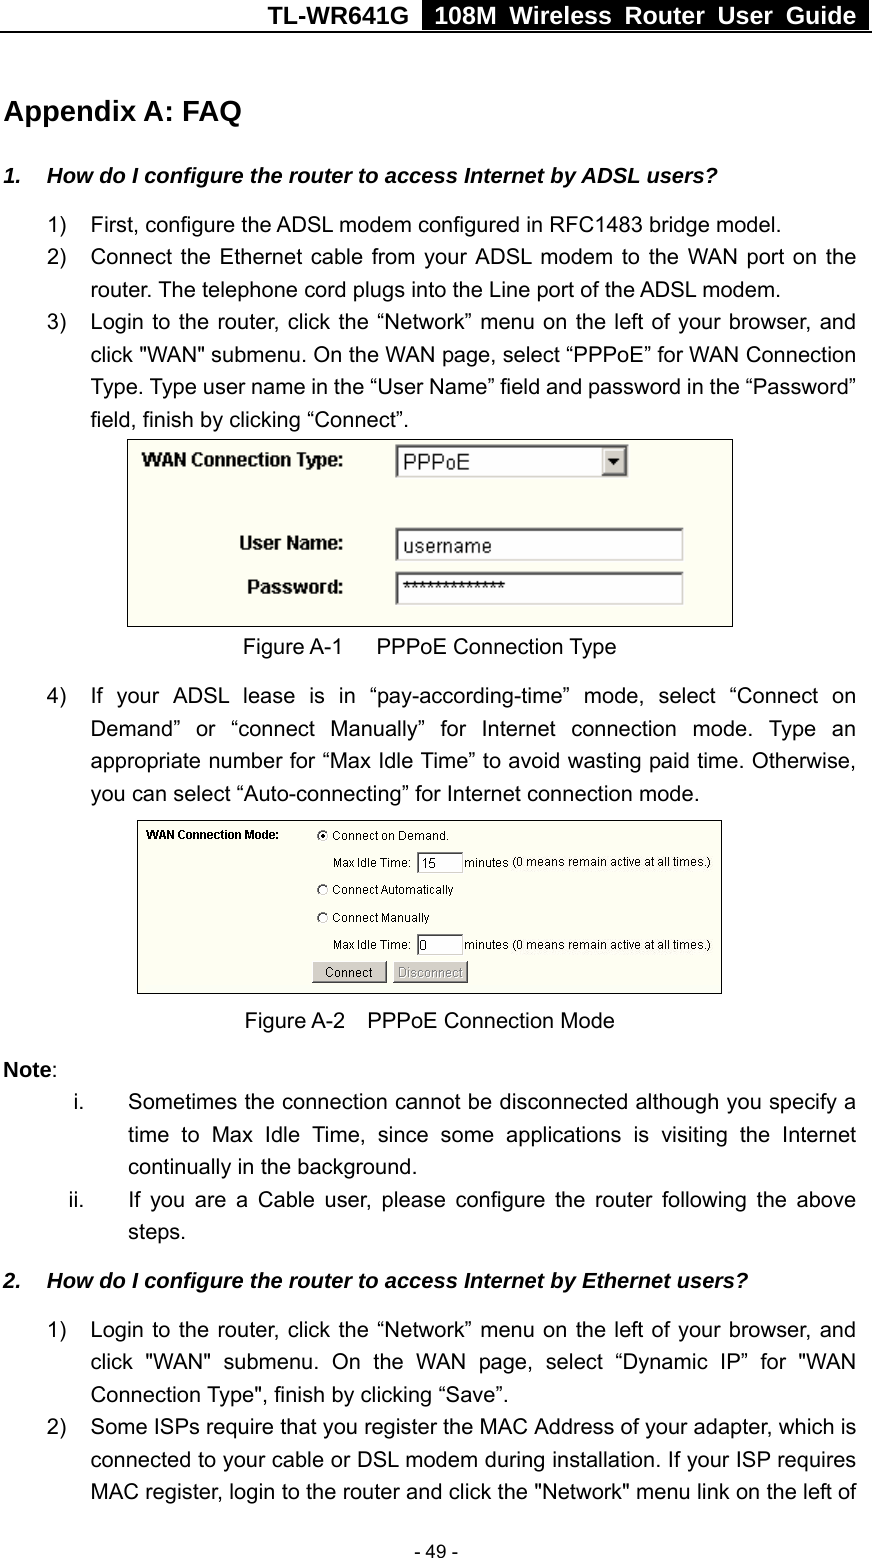 TL-WR641G   108M Wireless Router User Guide   - 49 -Appendix A: FAQ 1.  How do I configure the router to access Internet by ADSL users? 1)  First, configure the ADSL modem configured in RFC1483 bridge model. 2)  Connect the Ethernet cable from your ADSL modem to the WAN port on the router. The telephone cord plugs into the Line port of the ADSL modem. 3)  Login to the router, click the “Network” menu on the left of your browser, and click &quot;WAN&quot; submenu. On the WAN page, select “PPPoE” for WAN Connection Type. Type user name in the “User Name” field and password in the “Password” field, finish by clicking “Connect”.  Figure A-1   PPPoE Connection Type 4)  If your ADSL lease is in “pay-according-time” mode, select “Connect on Demand” or “connect Manually” for Internet connection mode. Type an appropriate number for “Max Idle Time” to avoid wasting paid time. Otherwise, you can select “Auto-connecting” for Internet connection mode.  Figure A-2  PPPoE Connection Mode Note:  i.  Sometimes the connection cannot be disconnected although you specify a time to Max Idle Time, since some applications is visiting the Internet continually in the background. ii.  If you are a Cable user, please configure the router following the above steps. 2.  How do I configure the router to access Internet by Ethernet users? 1)  Login to the router, click the “Network” menu on the left of your browser, and click &quot;WAN&quot; submenu. On the WAN page, select “Dynamic IP” for &quot;WAN Connection Type&quot;, finish by clicking “Save”. 2)  Some ISPs require that you register the MAC Address of your adapter, which is connected to your cable or DSL modem during installation. If your ISP requires MAC register, login to the router and click the &quot;Network&quot; menu link on the left of 